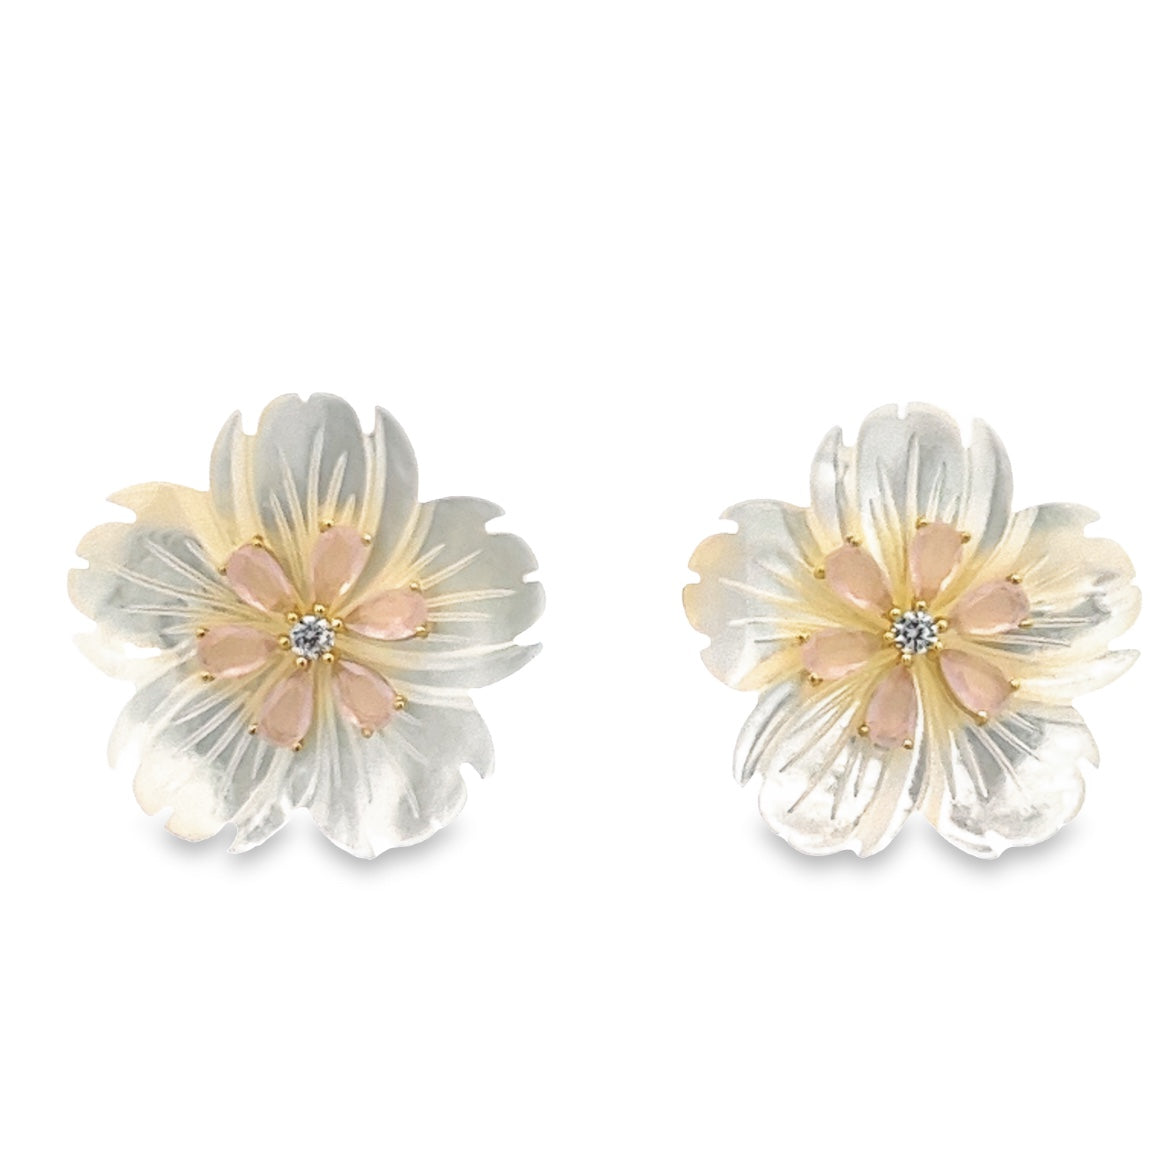 925 SILVER PLATED FLOWER EARRINGS WITH MOTHER OF PEARL